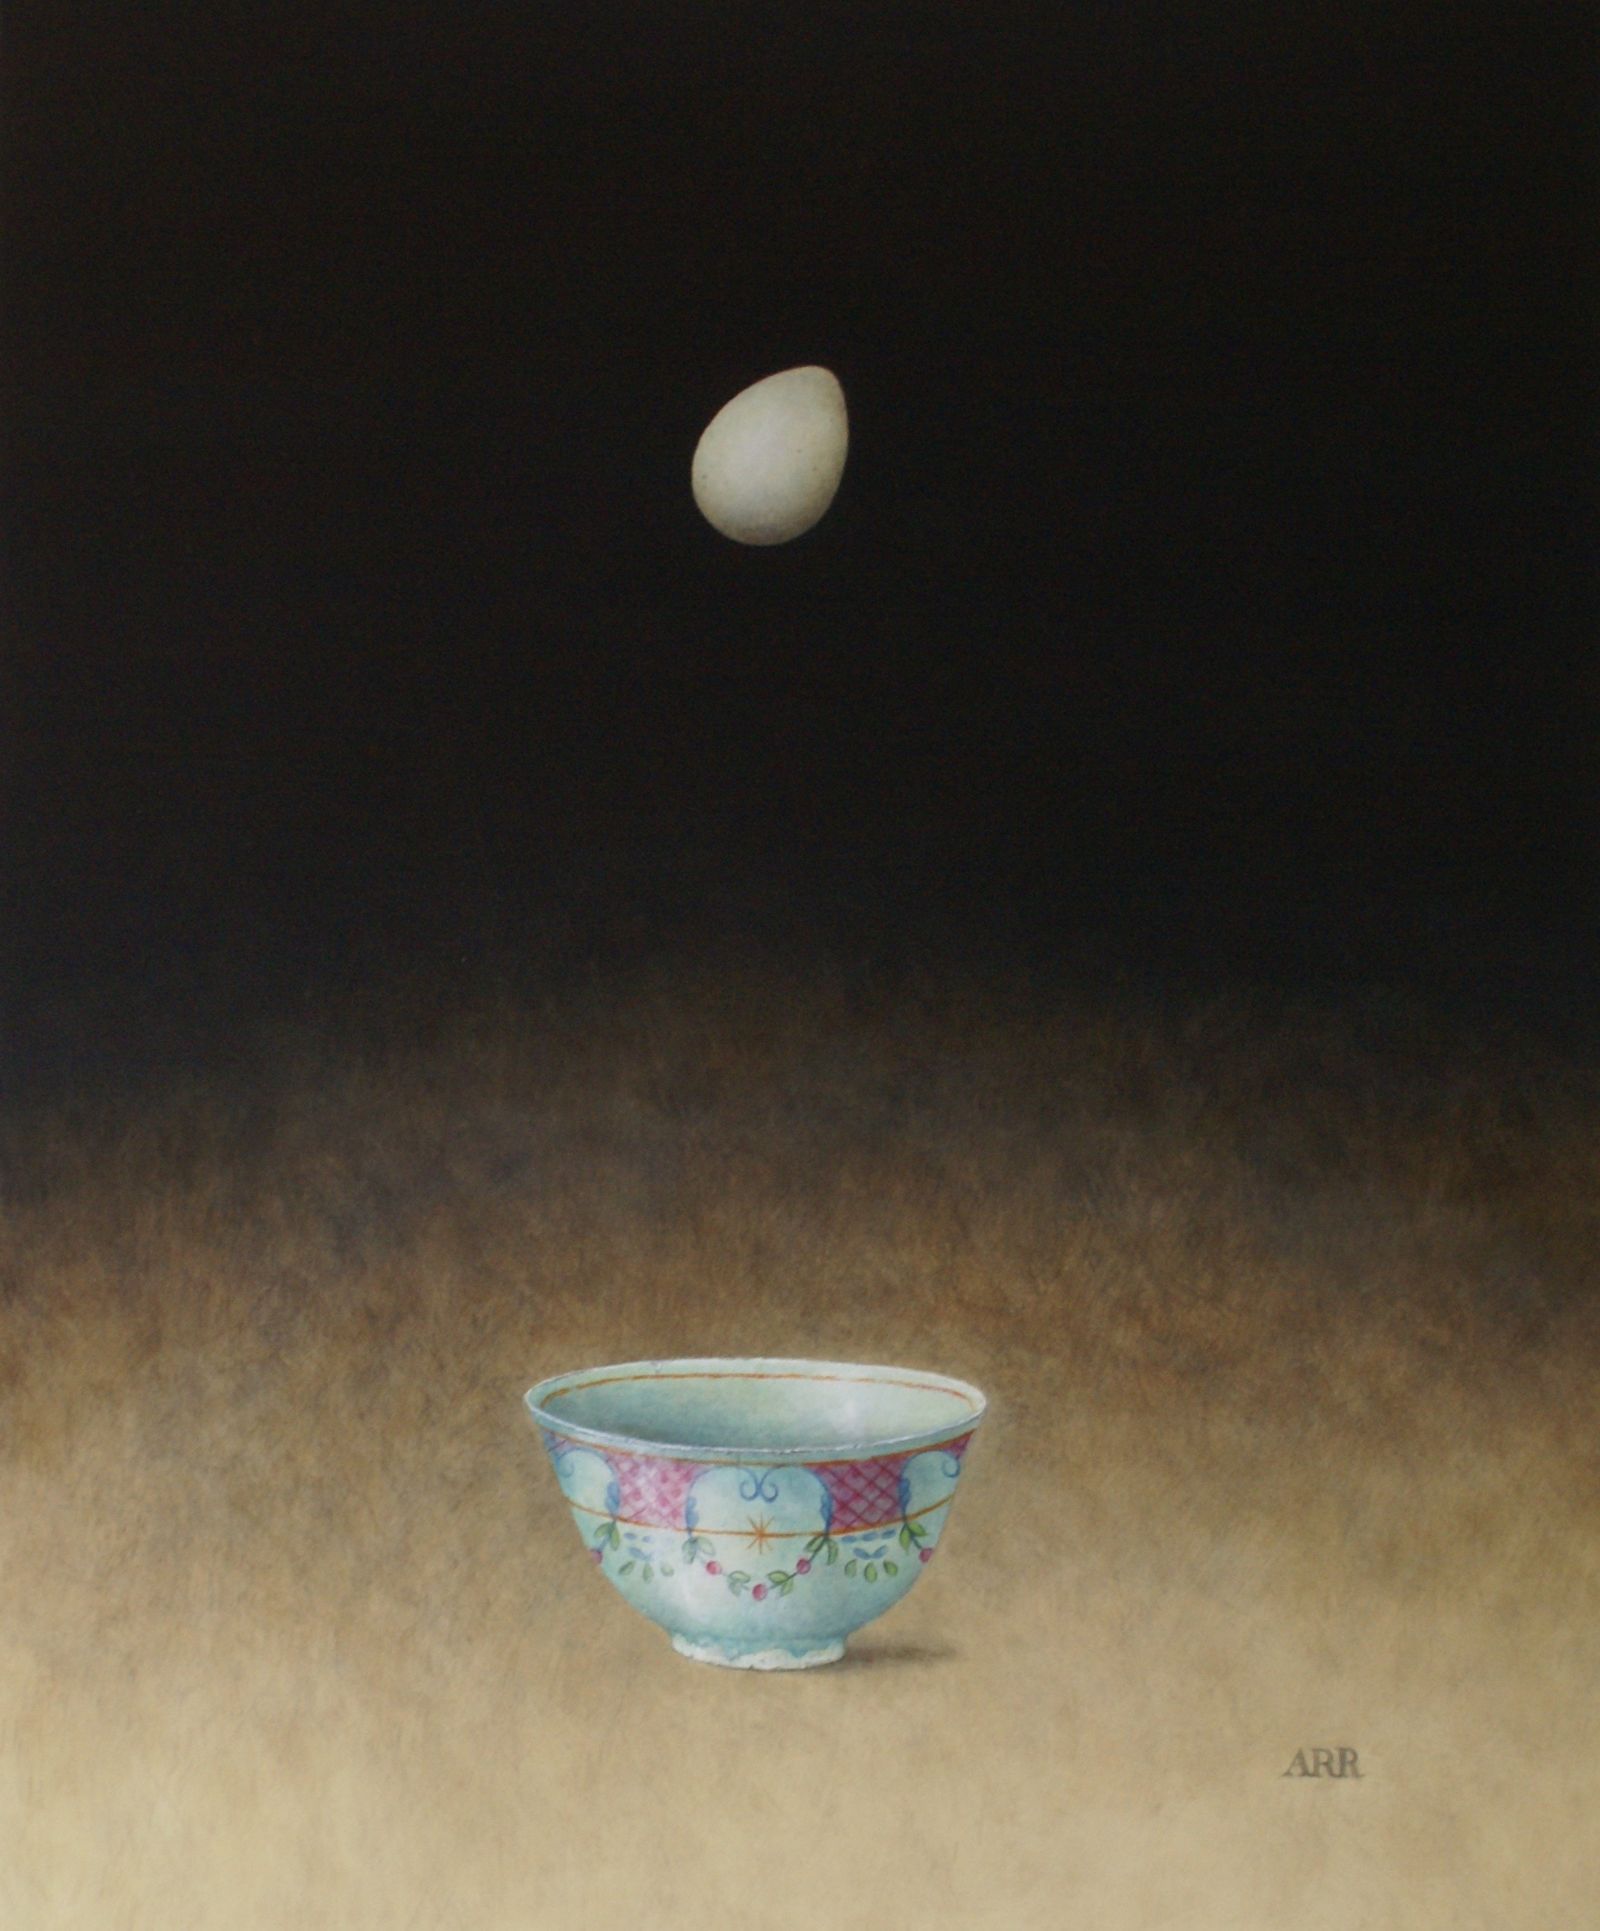 Turquoise Bowl with Falling Egg by Alison Rankin